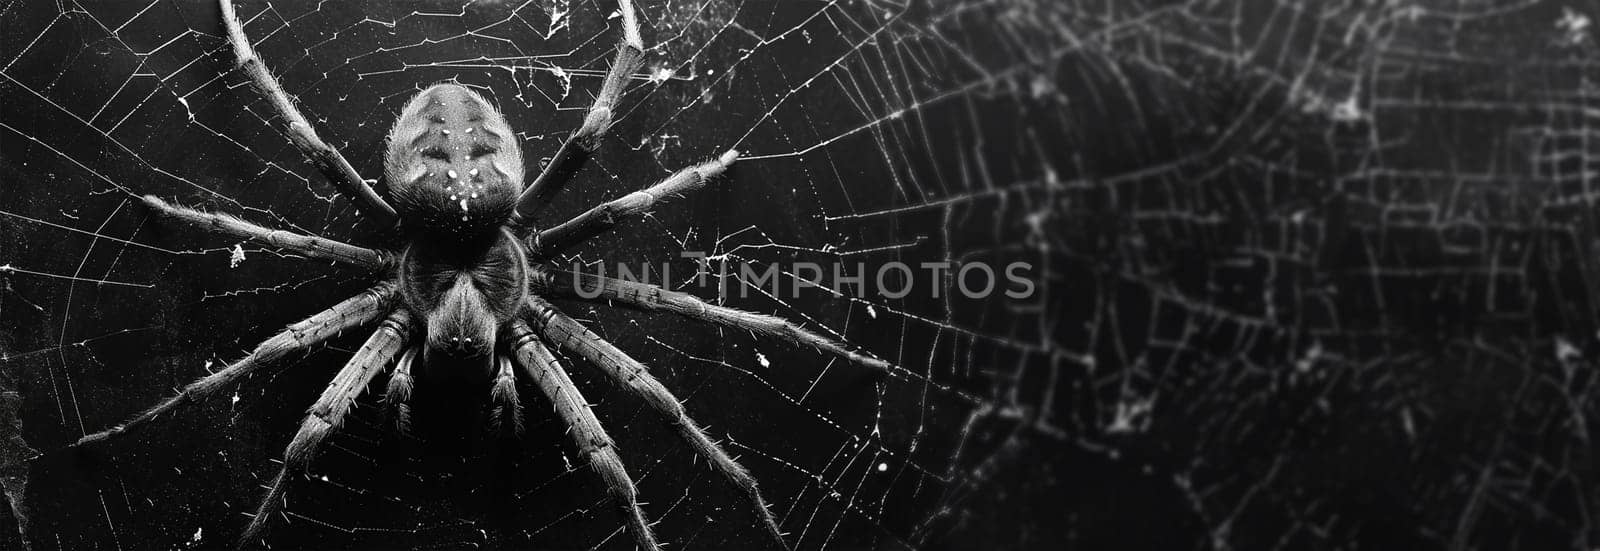 Scary close up of a spider on black background. Close up spider's web on retro vintage black color background for halloween night party design concept concept. Scary horror design by Annebel146